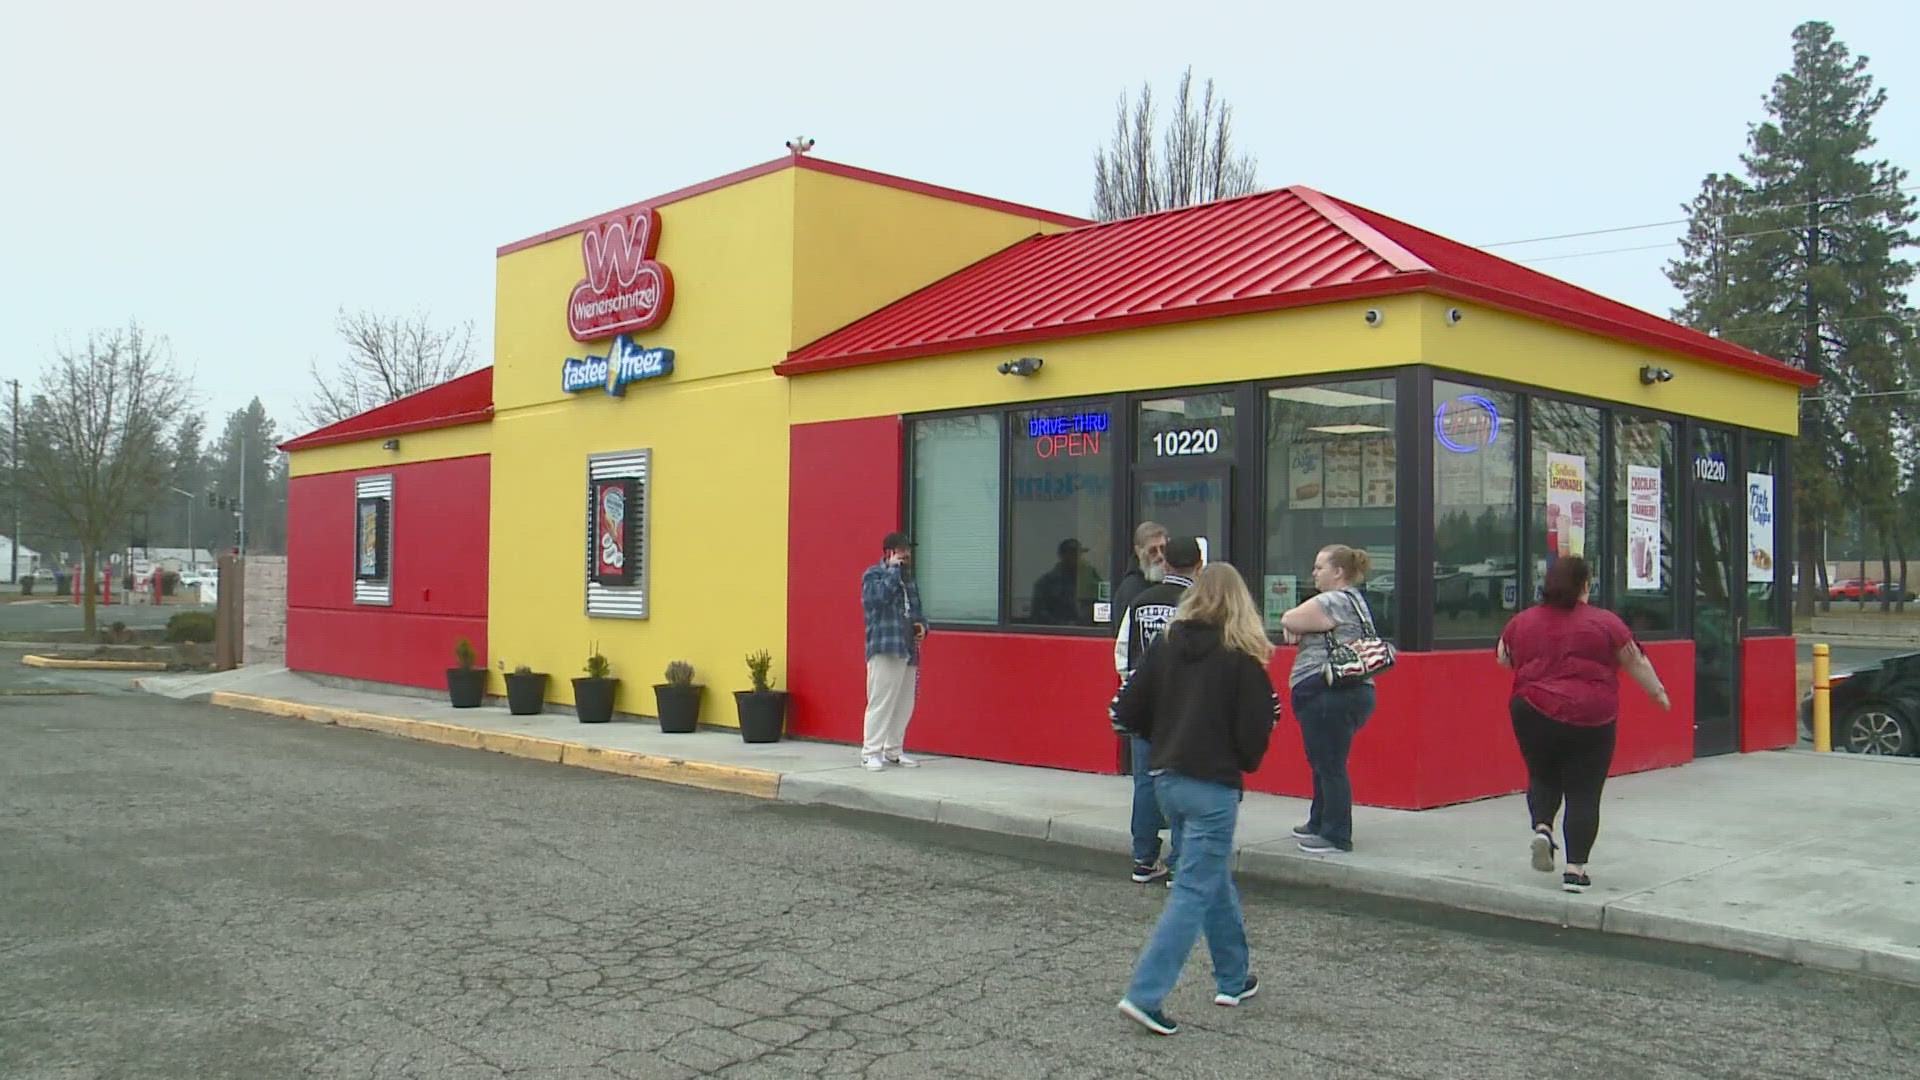 Lines extended around the block for the grand opening of the new Wienerschnitzel in North Spokane Friday.